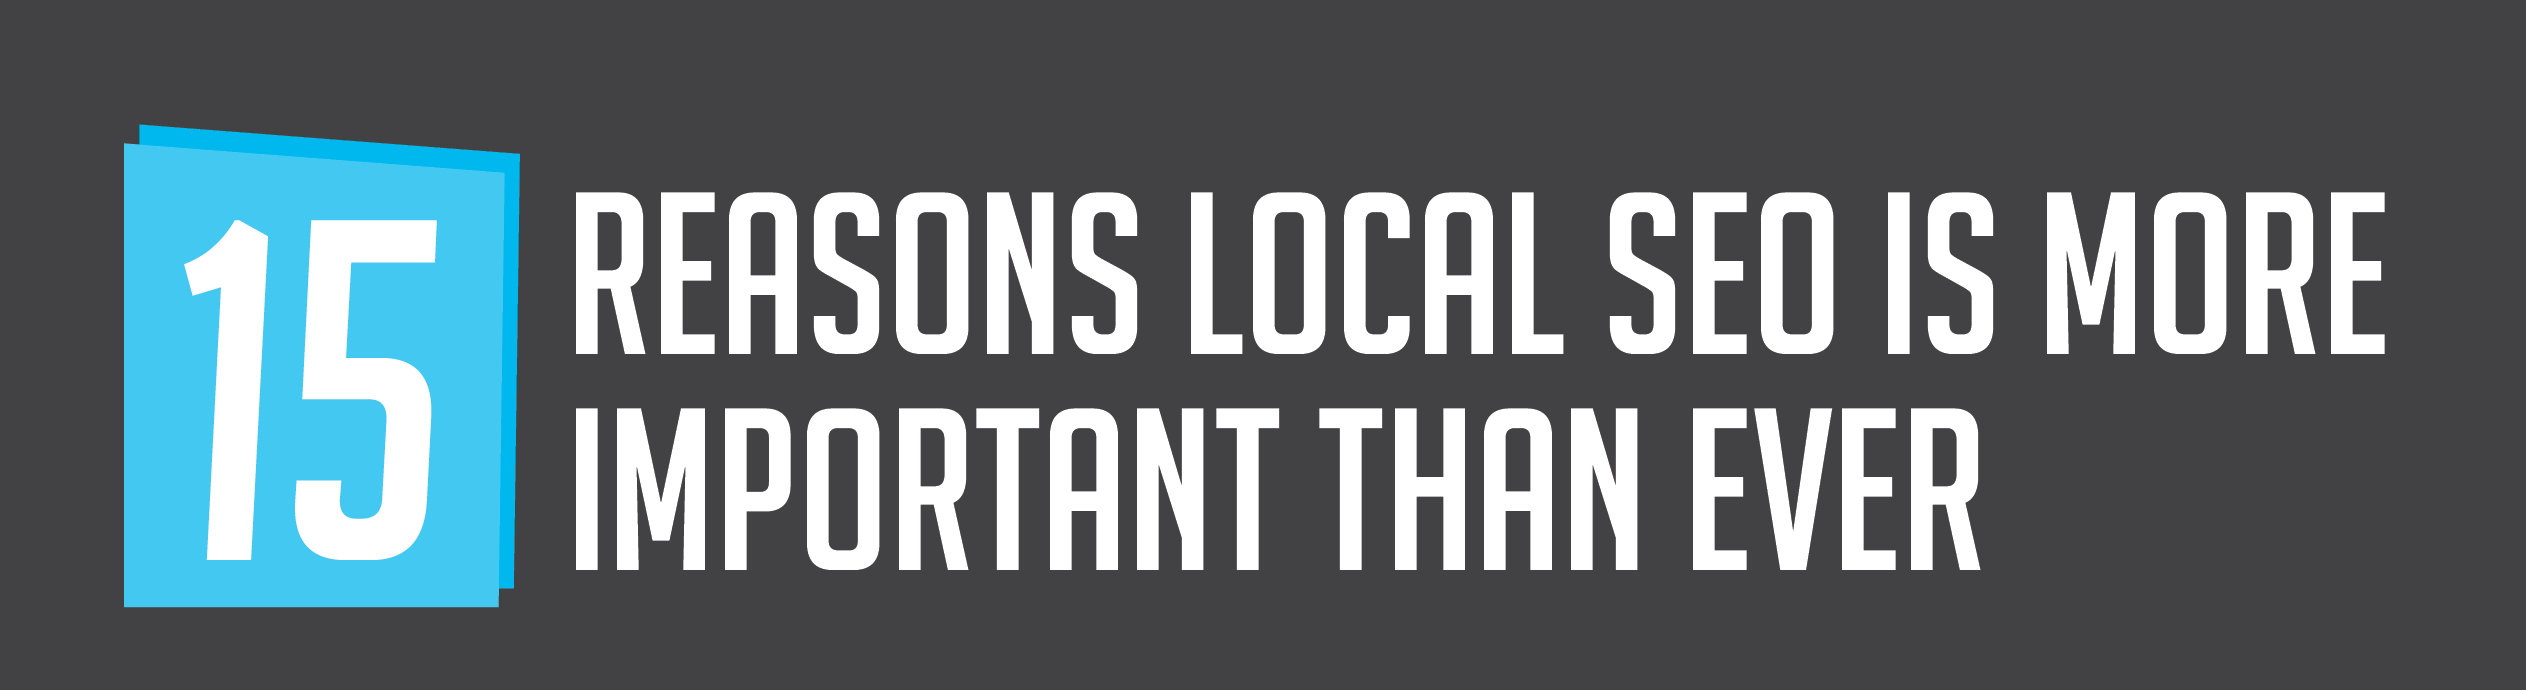 15 Reasons Why Local SEO Is More Important Than Ever